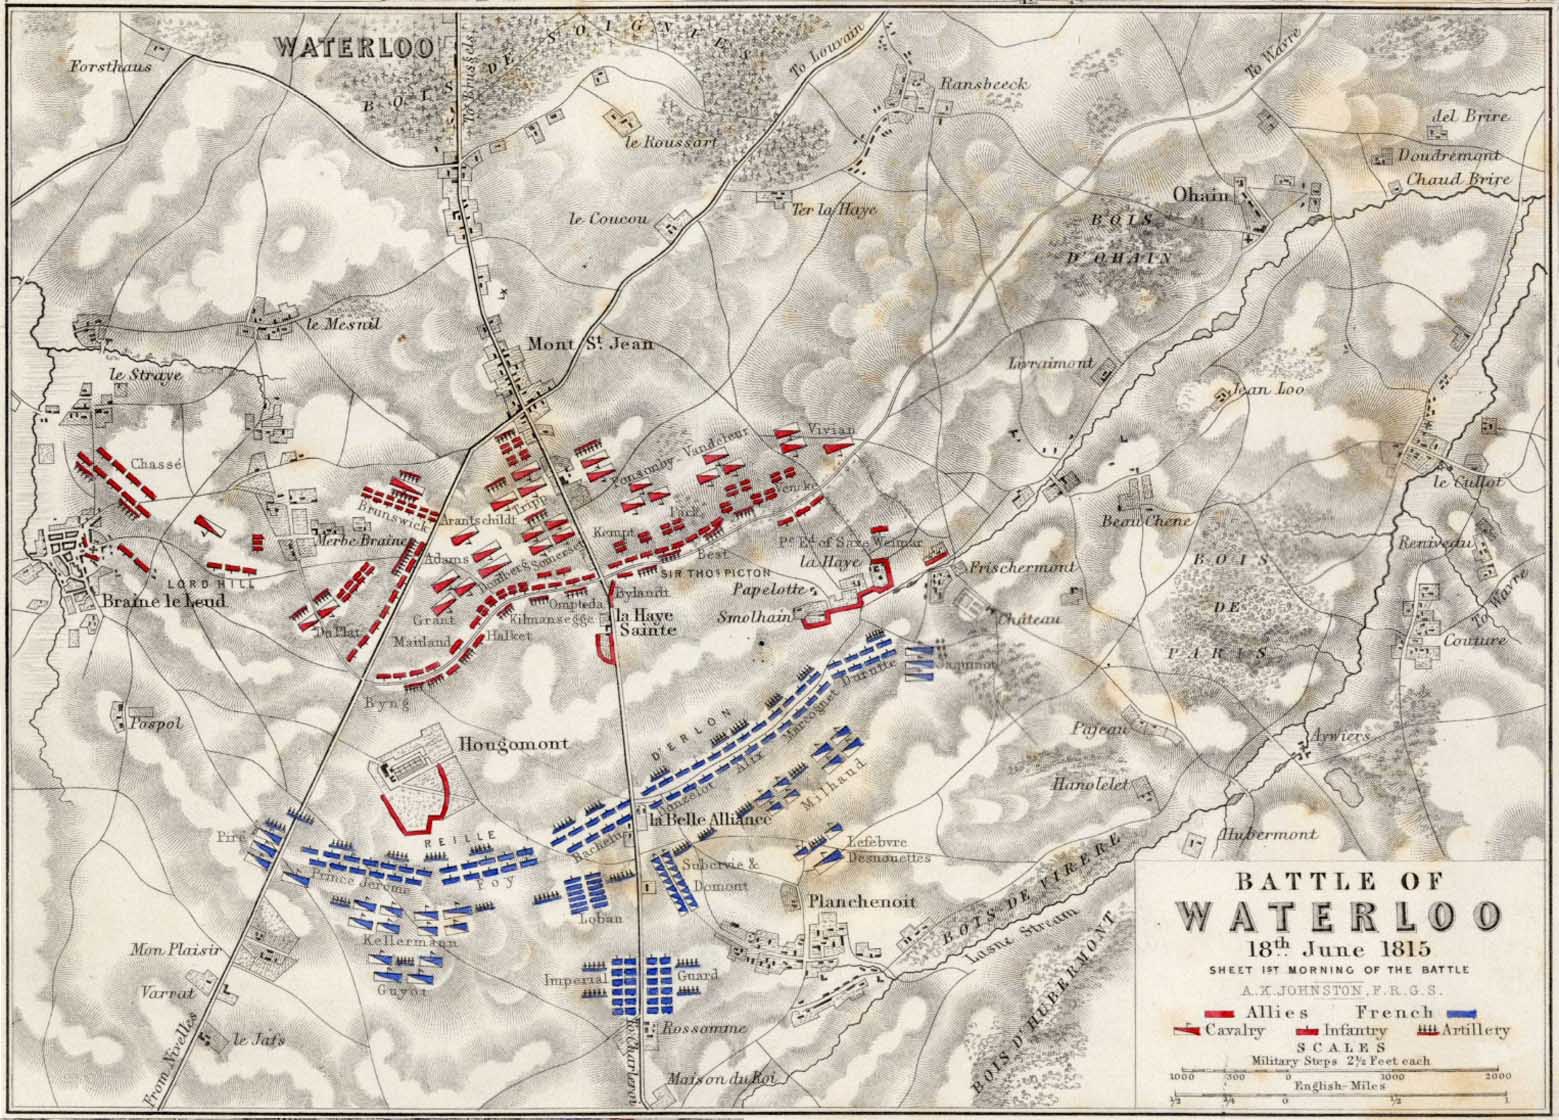 [TMP] "General campaign map of Waterloo." Topic